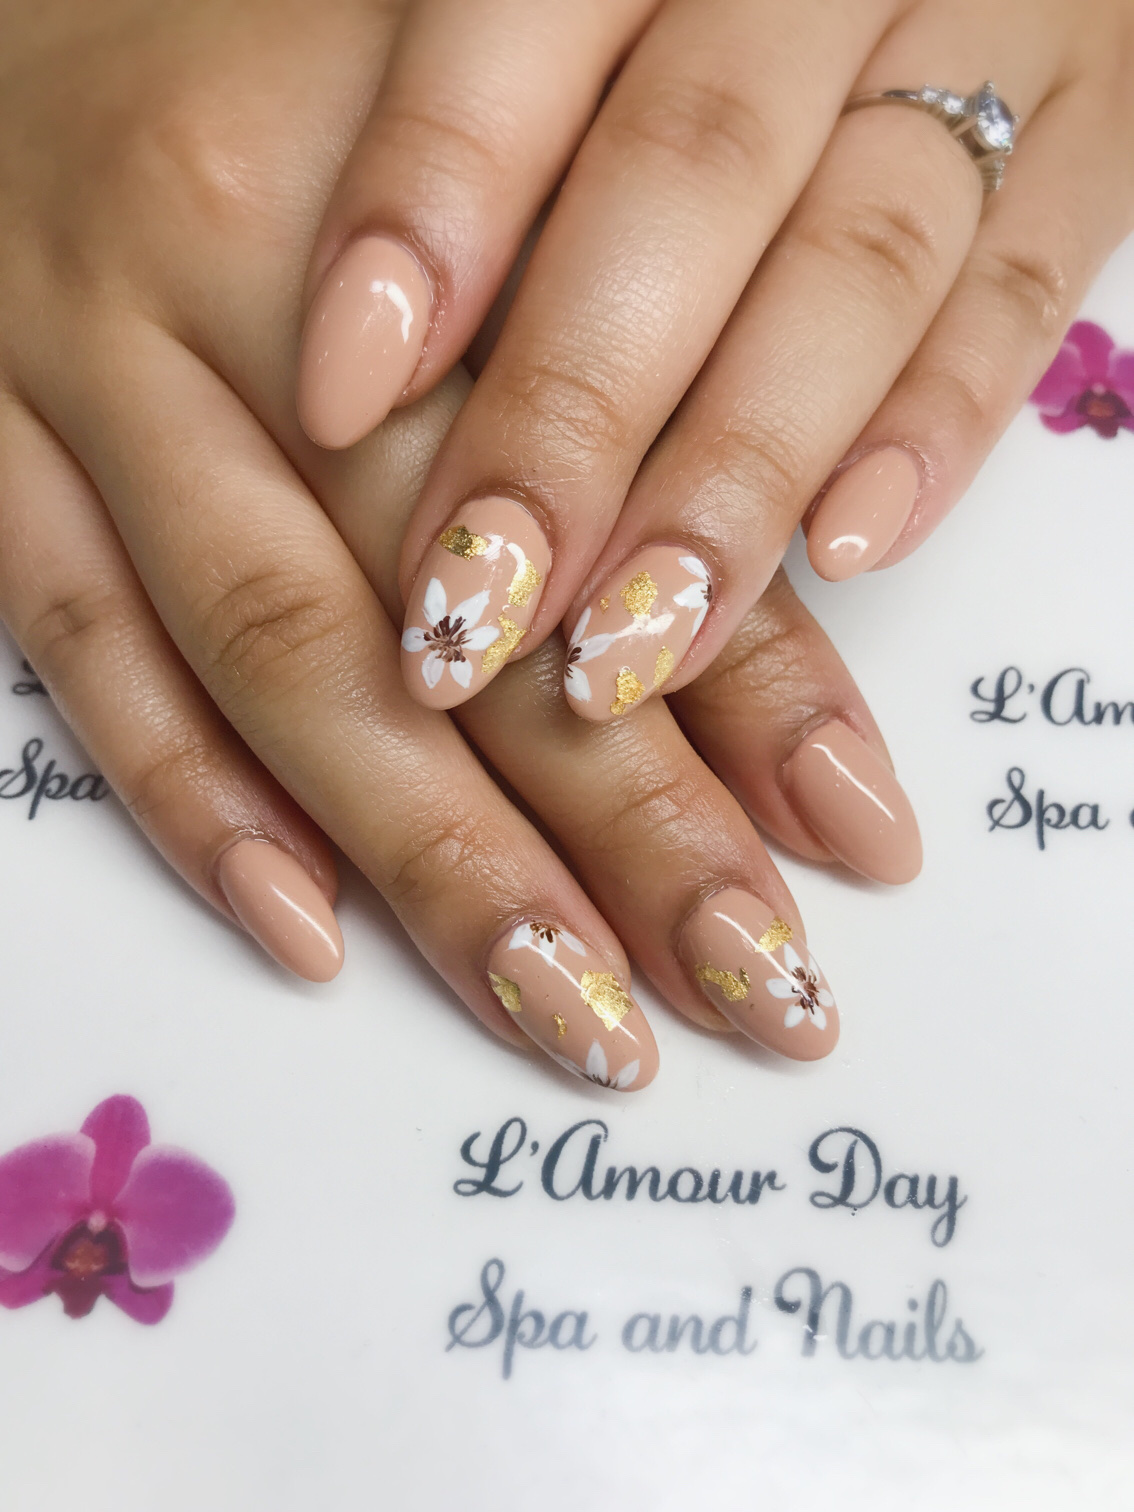 Nail Salon 45069 | L'Amour Day Nails & Spa of West Chester Township, OH  45069 | Manicure, Spa Pedicure, Acrylic Nails, Nail Enhancements, Gel Nails,  Dip Powder, Waxing